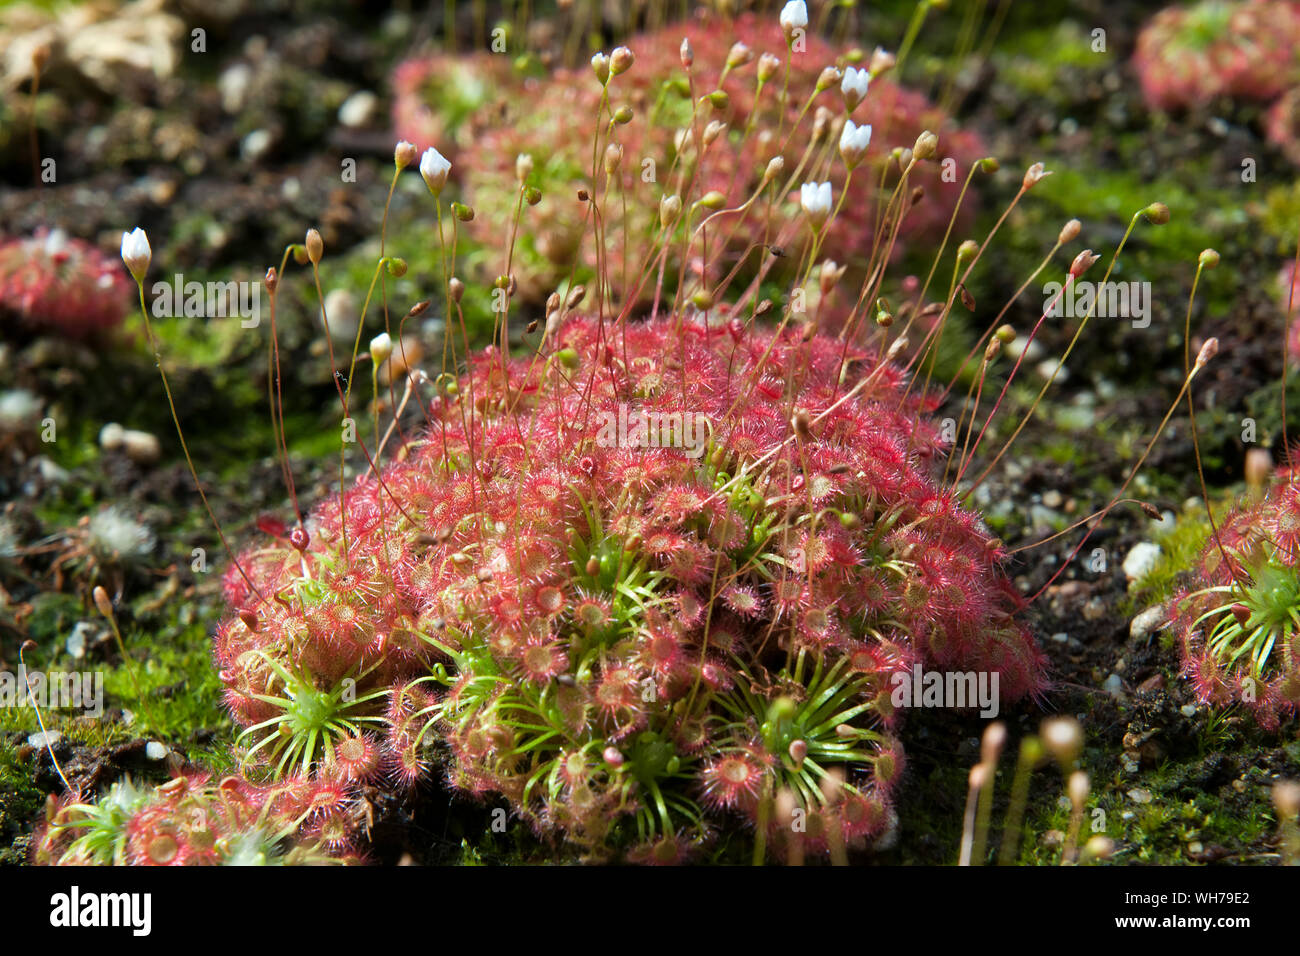 Sydney Australia, clump of  pygmy drosera sundew plant with sticky mucilage to catch insects Stock Photo